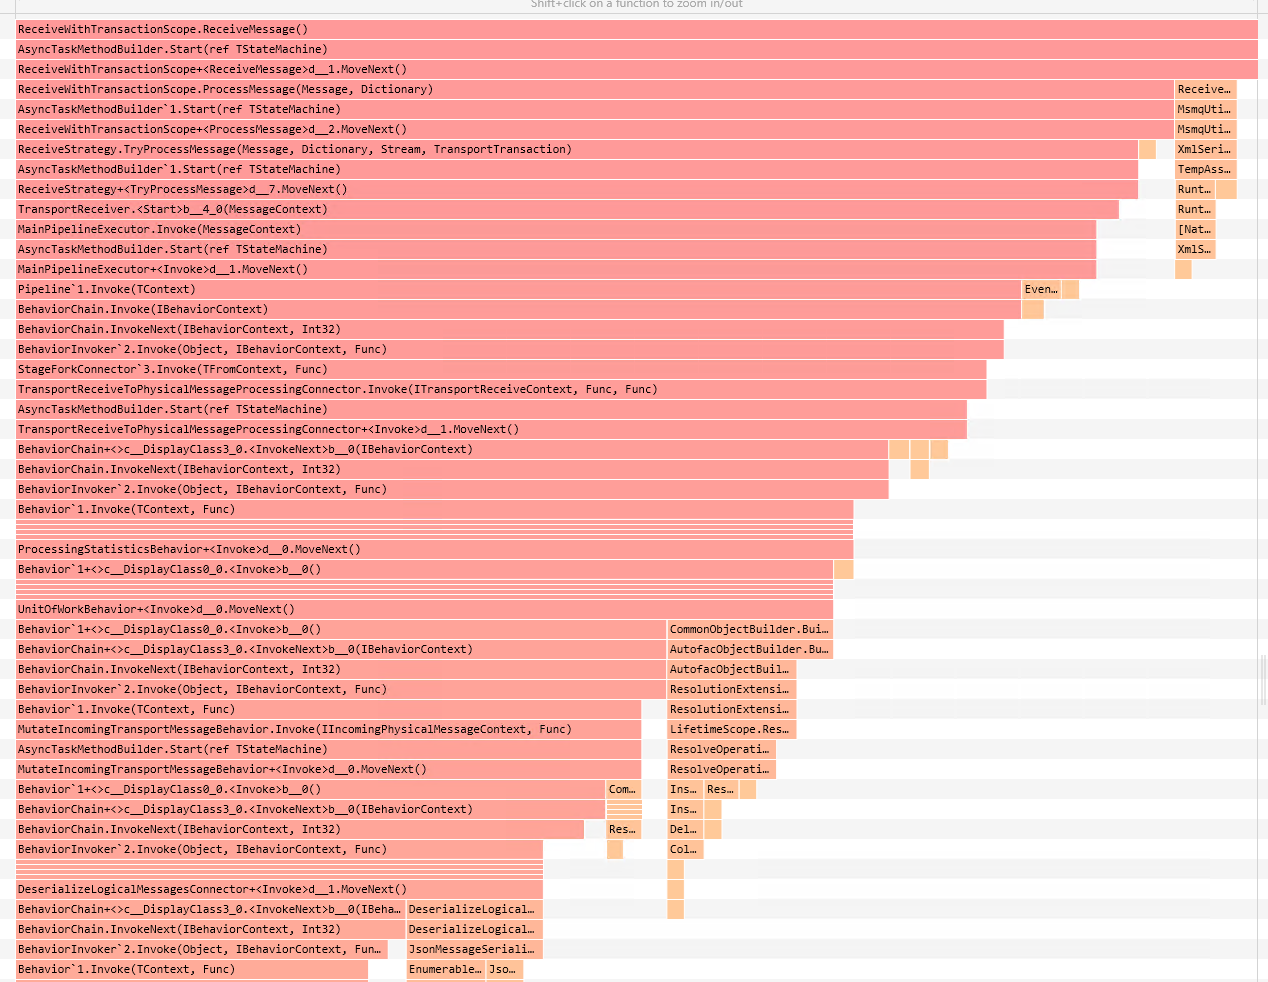 Pipeline receive CPU flamegraph overview